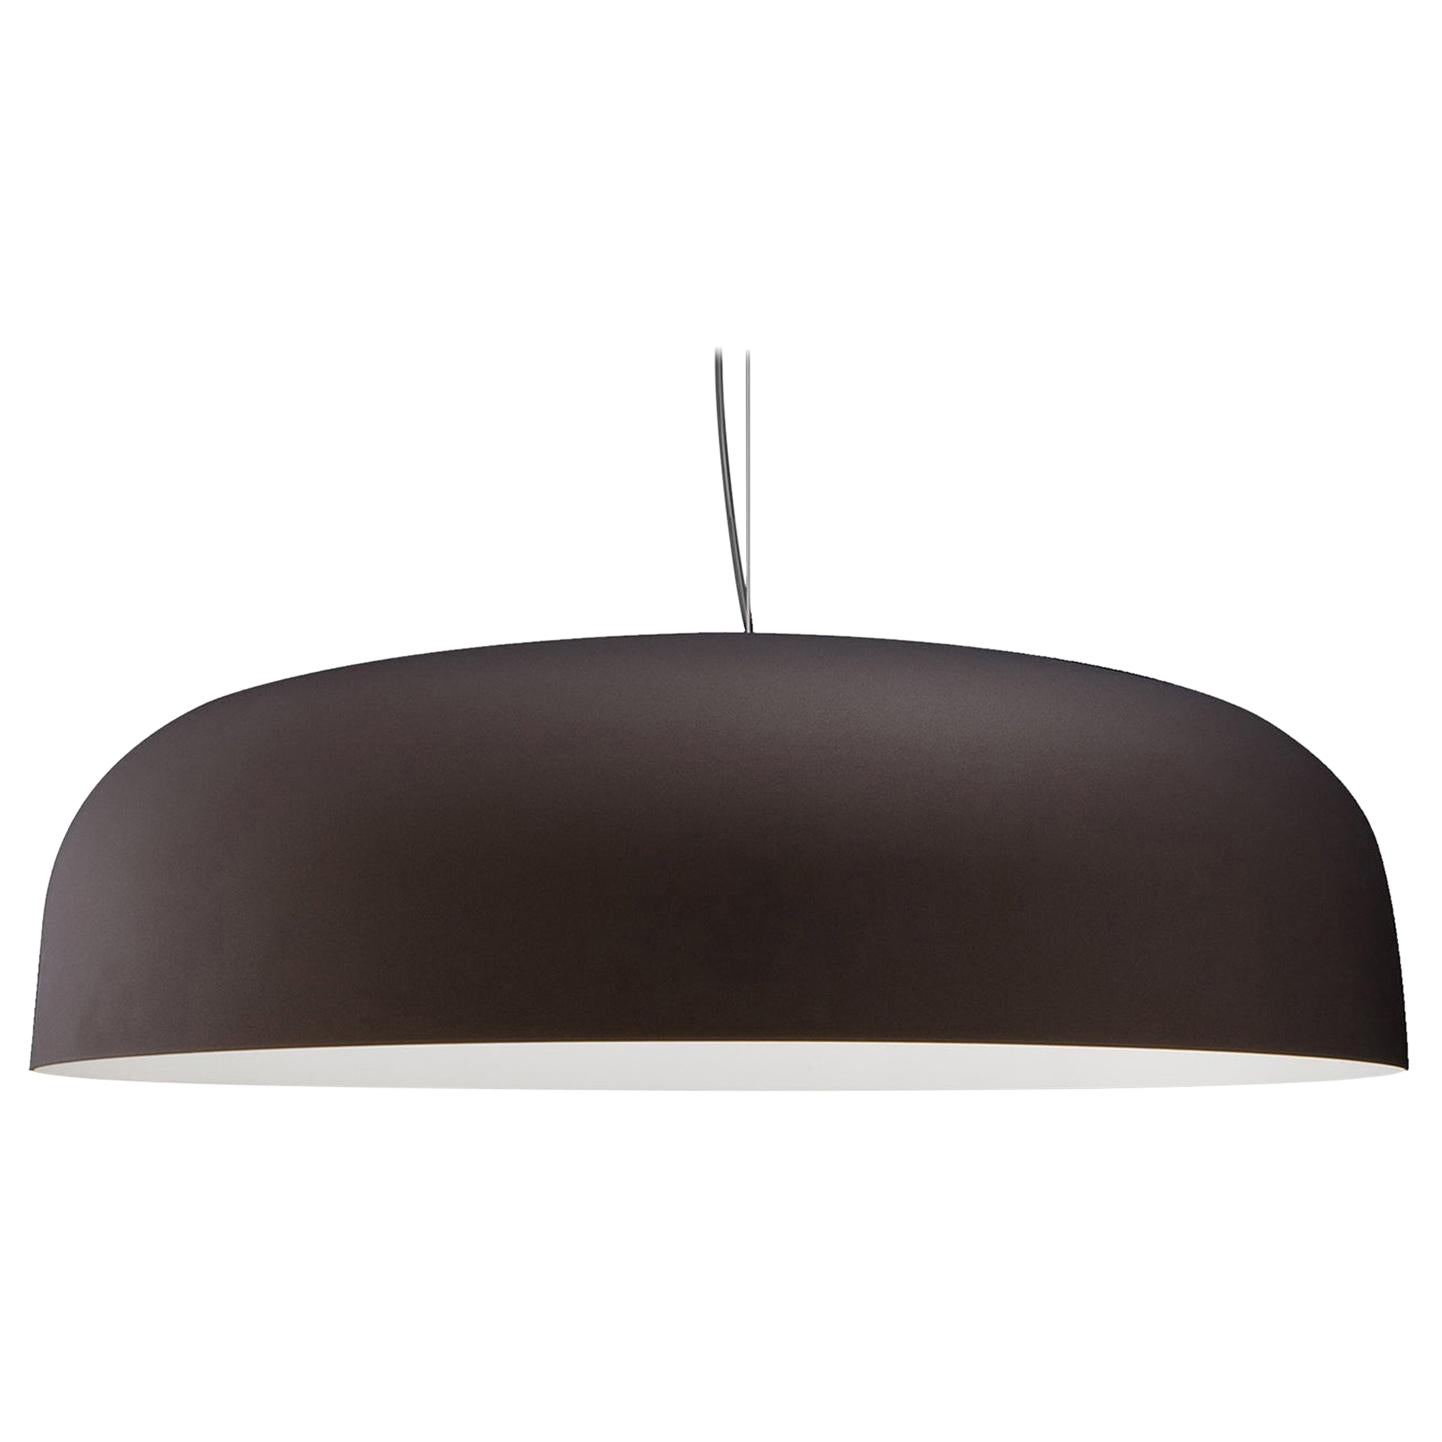 Francesco Rota Suspension Lamp 'Canopy' 421 Bronze and White by Oluce For Sale